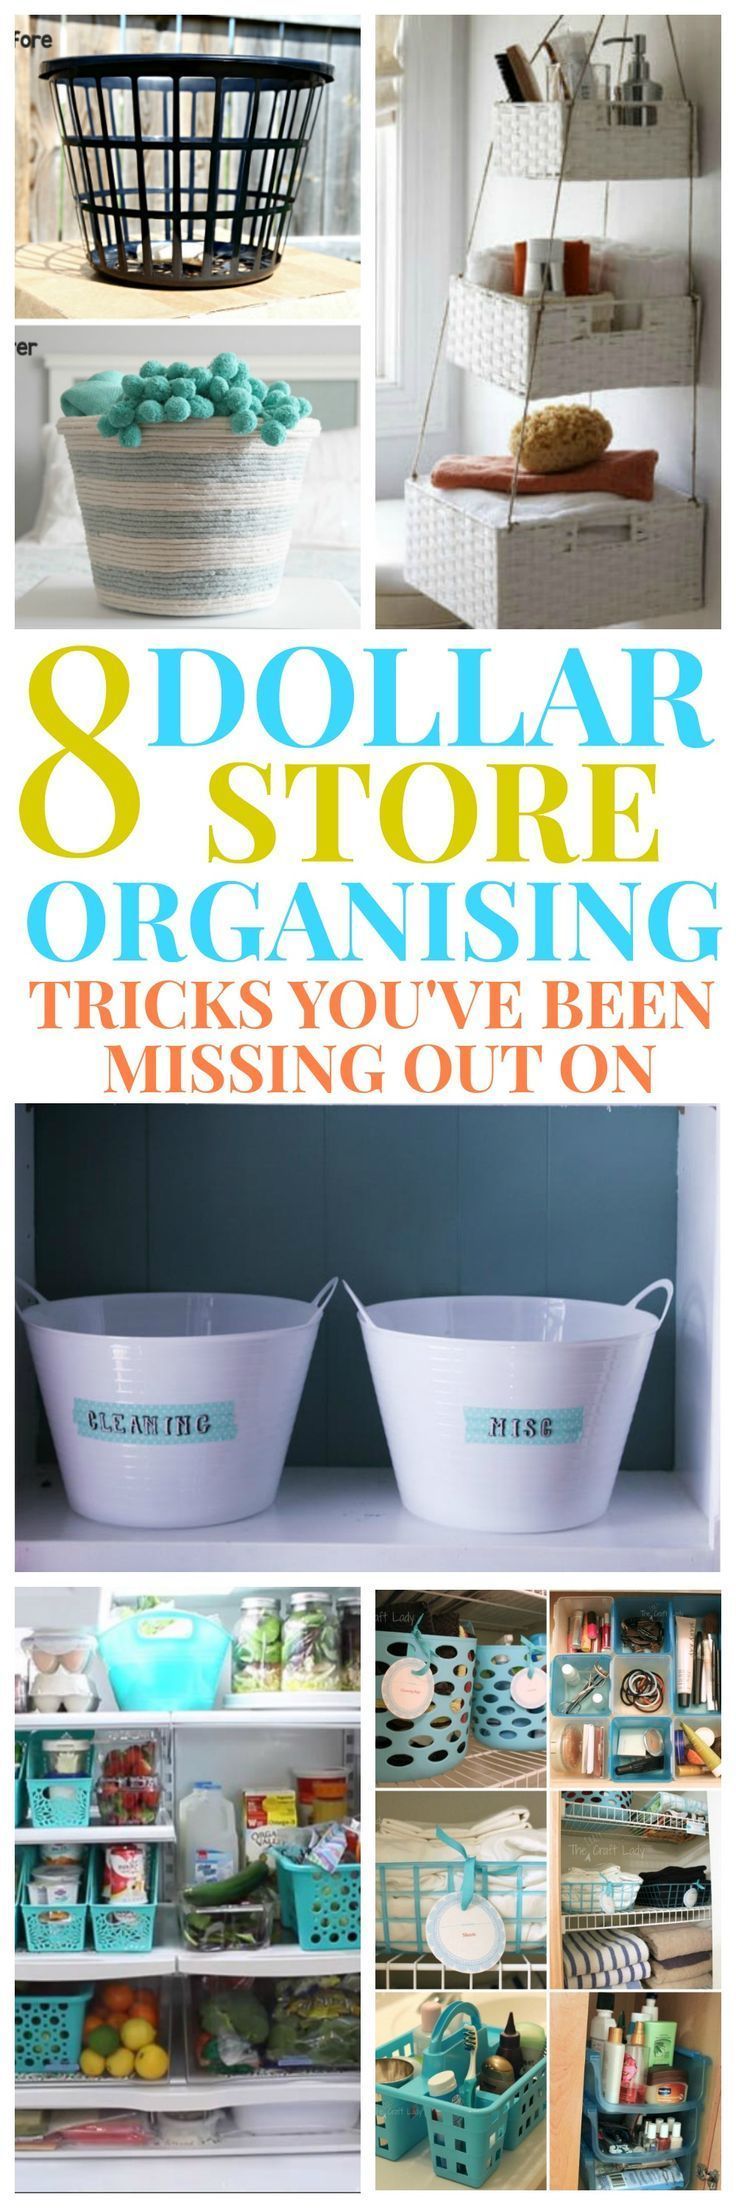 Check out these 8 Dollar Store Organising Tricks for your Home Decor.